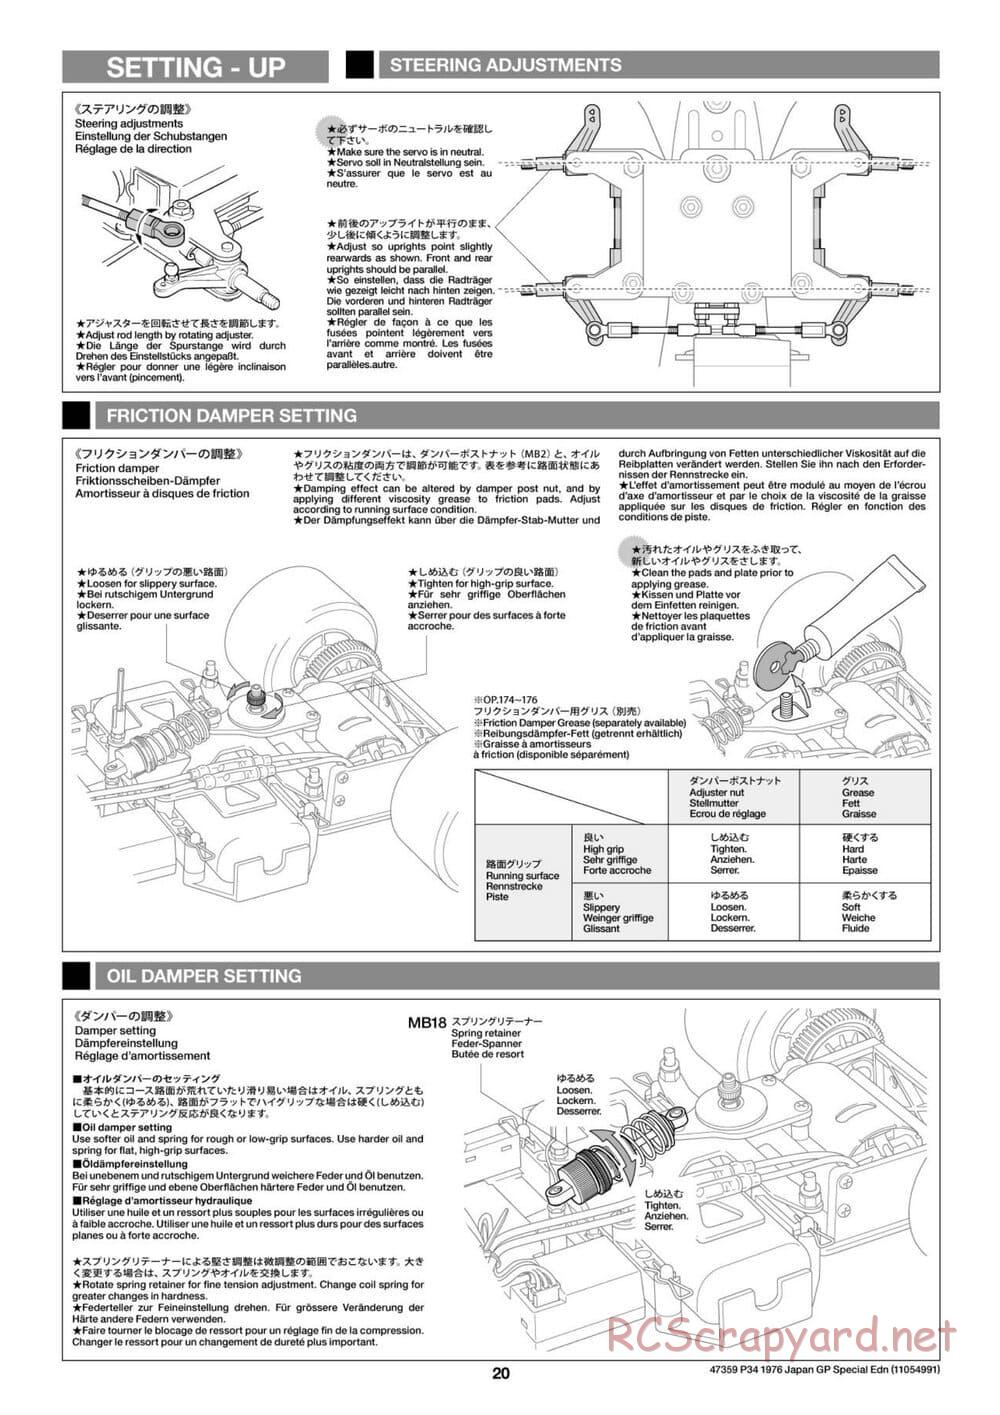 Tamiya - Tyrrell P34 1976 Japan Grand Prix Special - F103-6W Chassis - Manual - Page 20